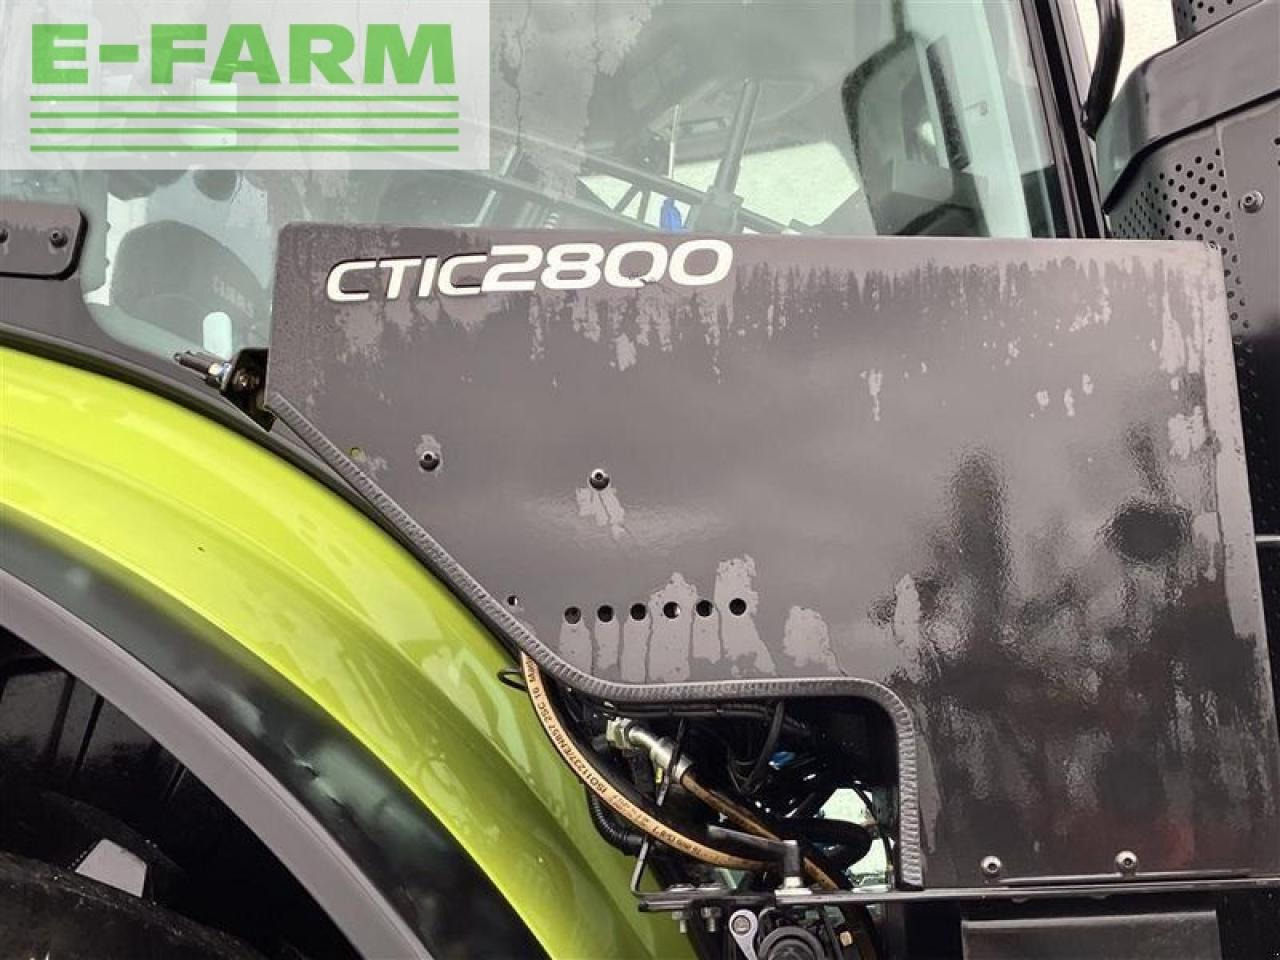 Tracteur agricole CLAAS axion 930 cmatic st5 cebis